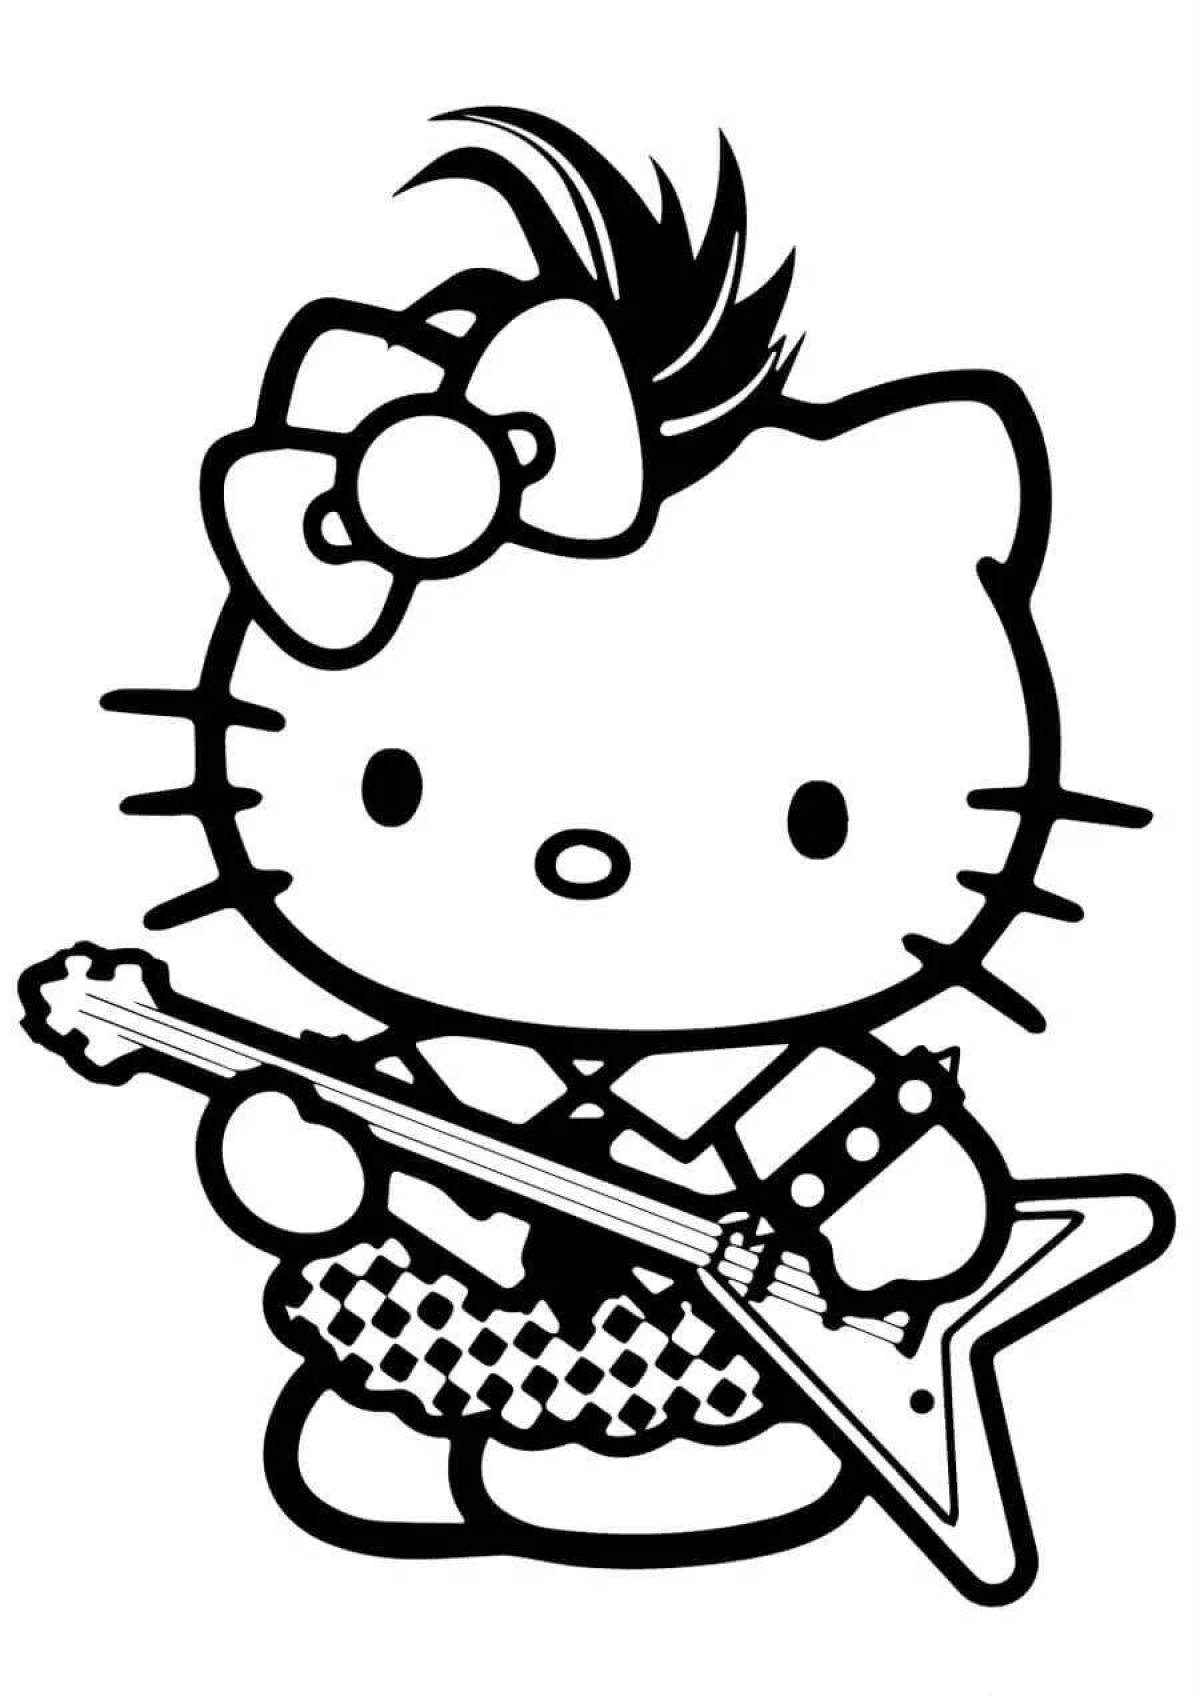 Excellent coloring hello kitty evil